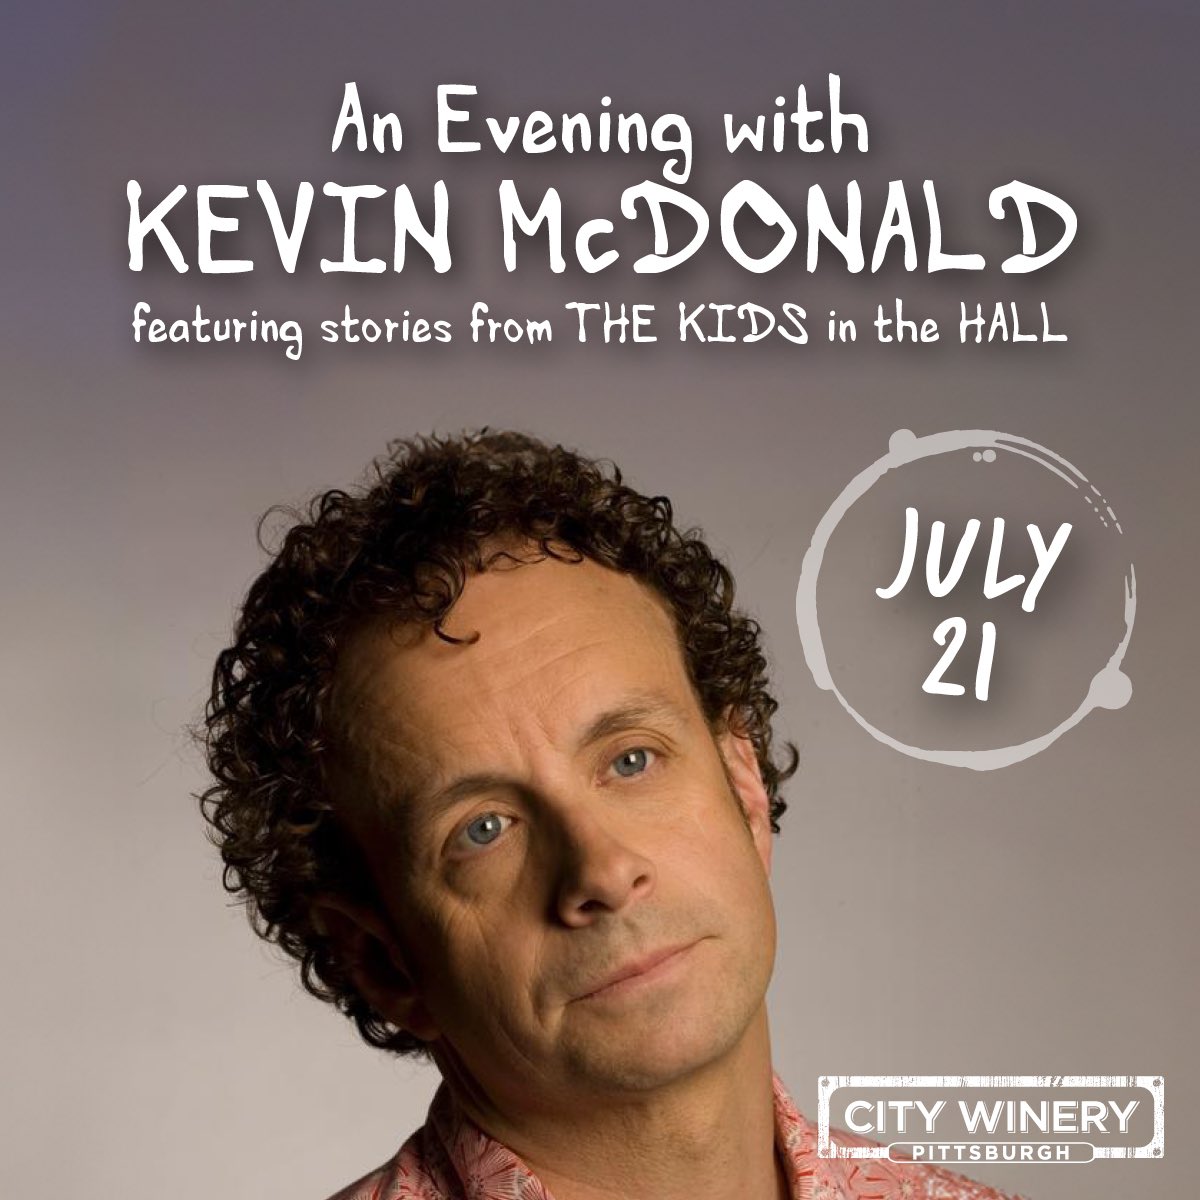 Pittsburgh! Don’t miss your chance to see @kevinthekith at @CityWineryPGH on July 21! Tickets available now at citywinery.com/pittsburgh/eve…